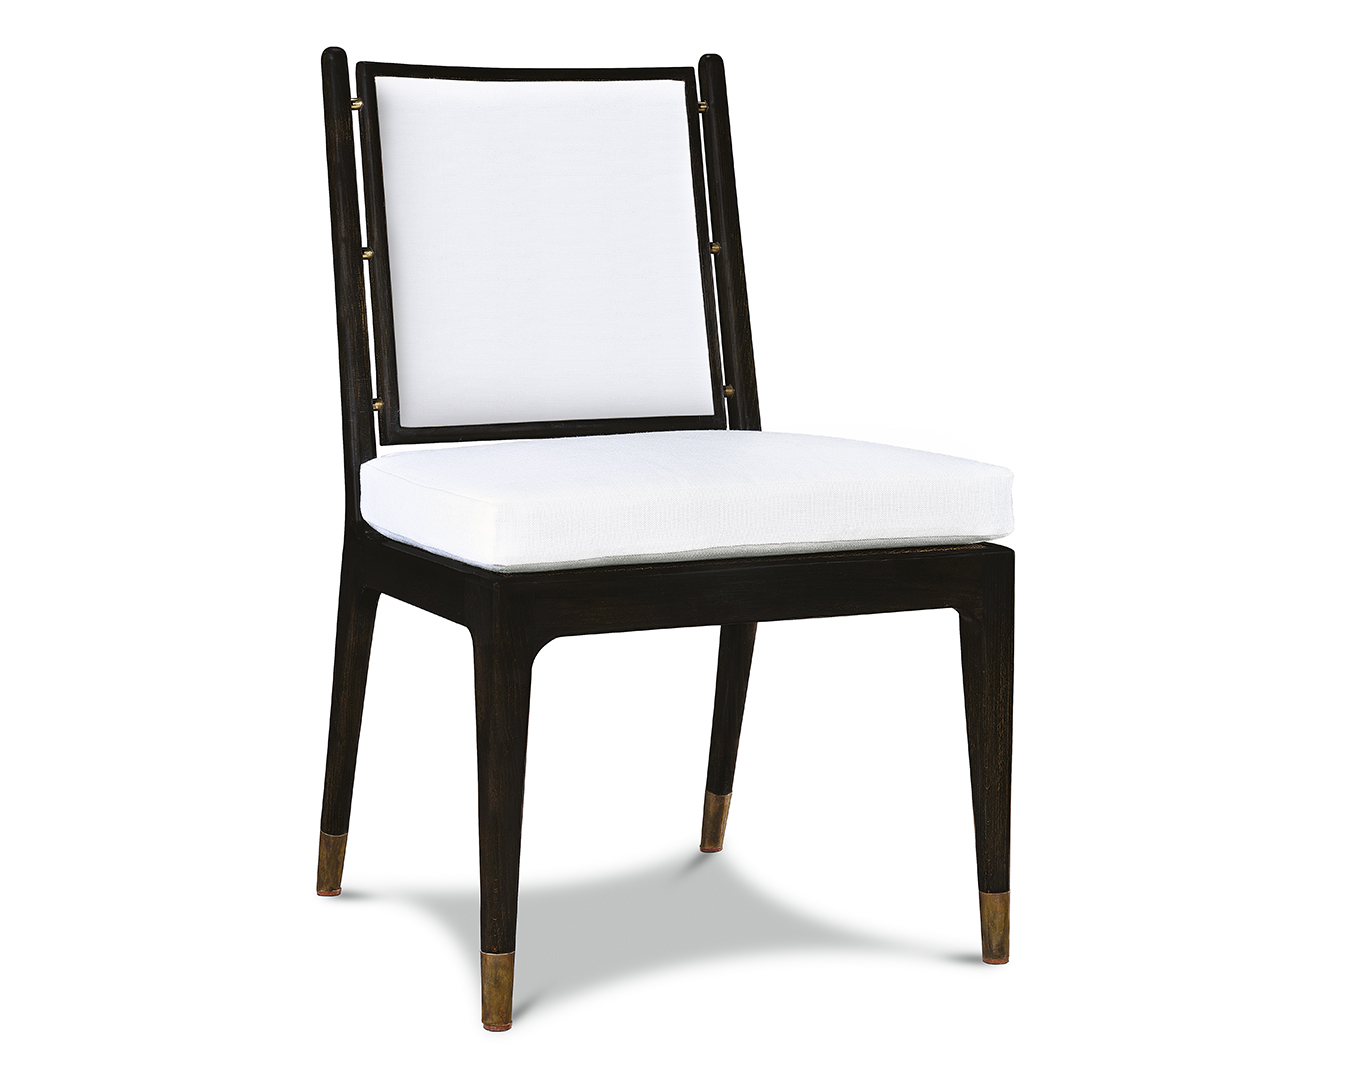 BAHL II SIDE UPHOLSTERED CHAIR